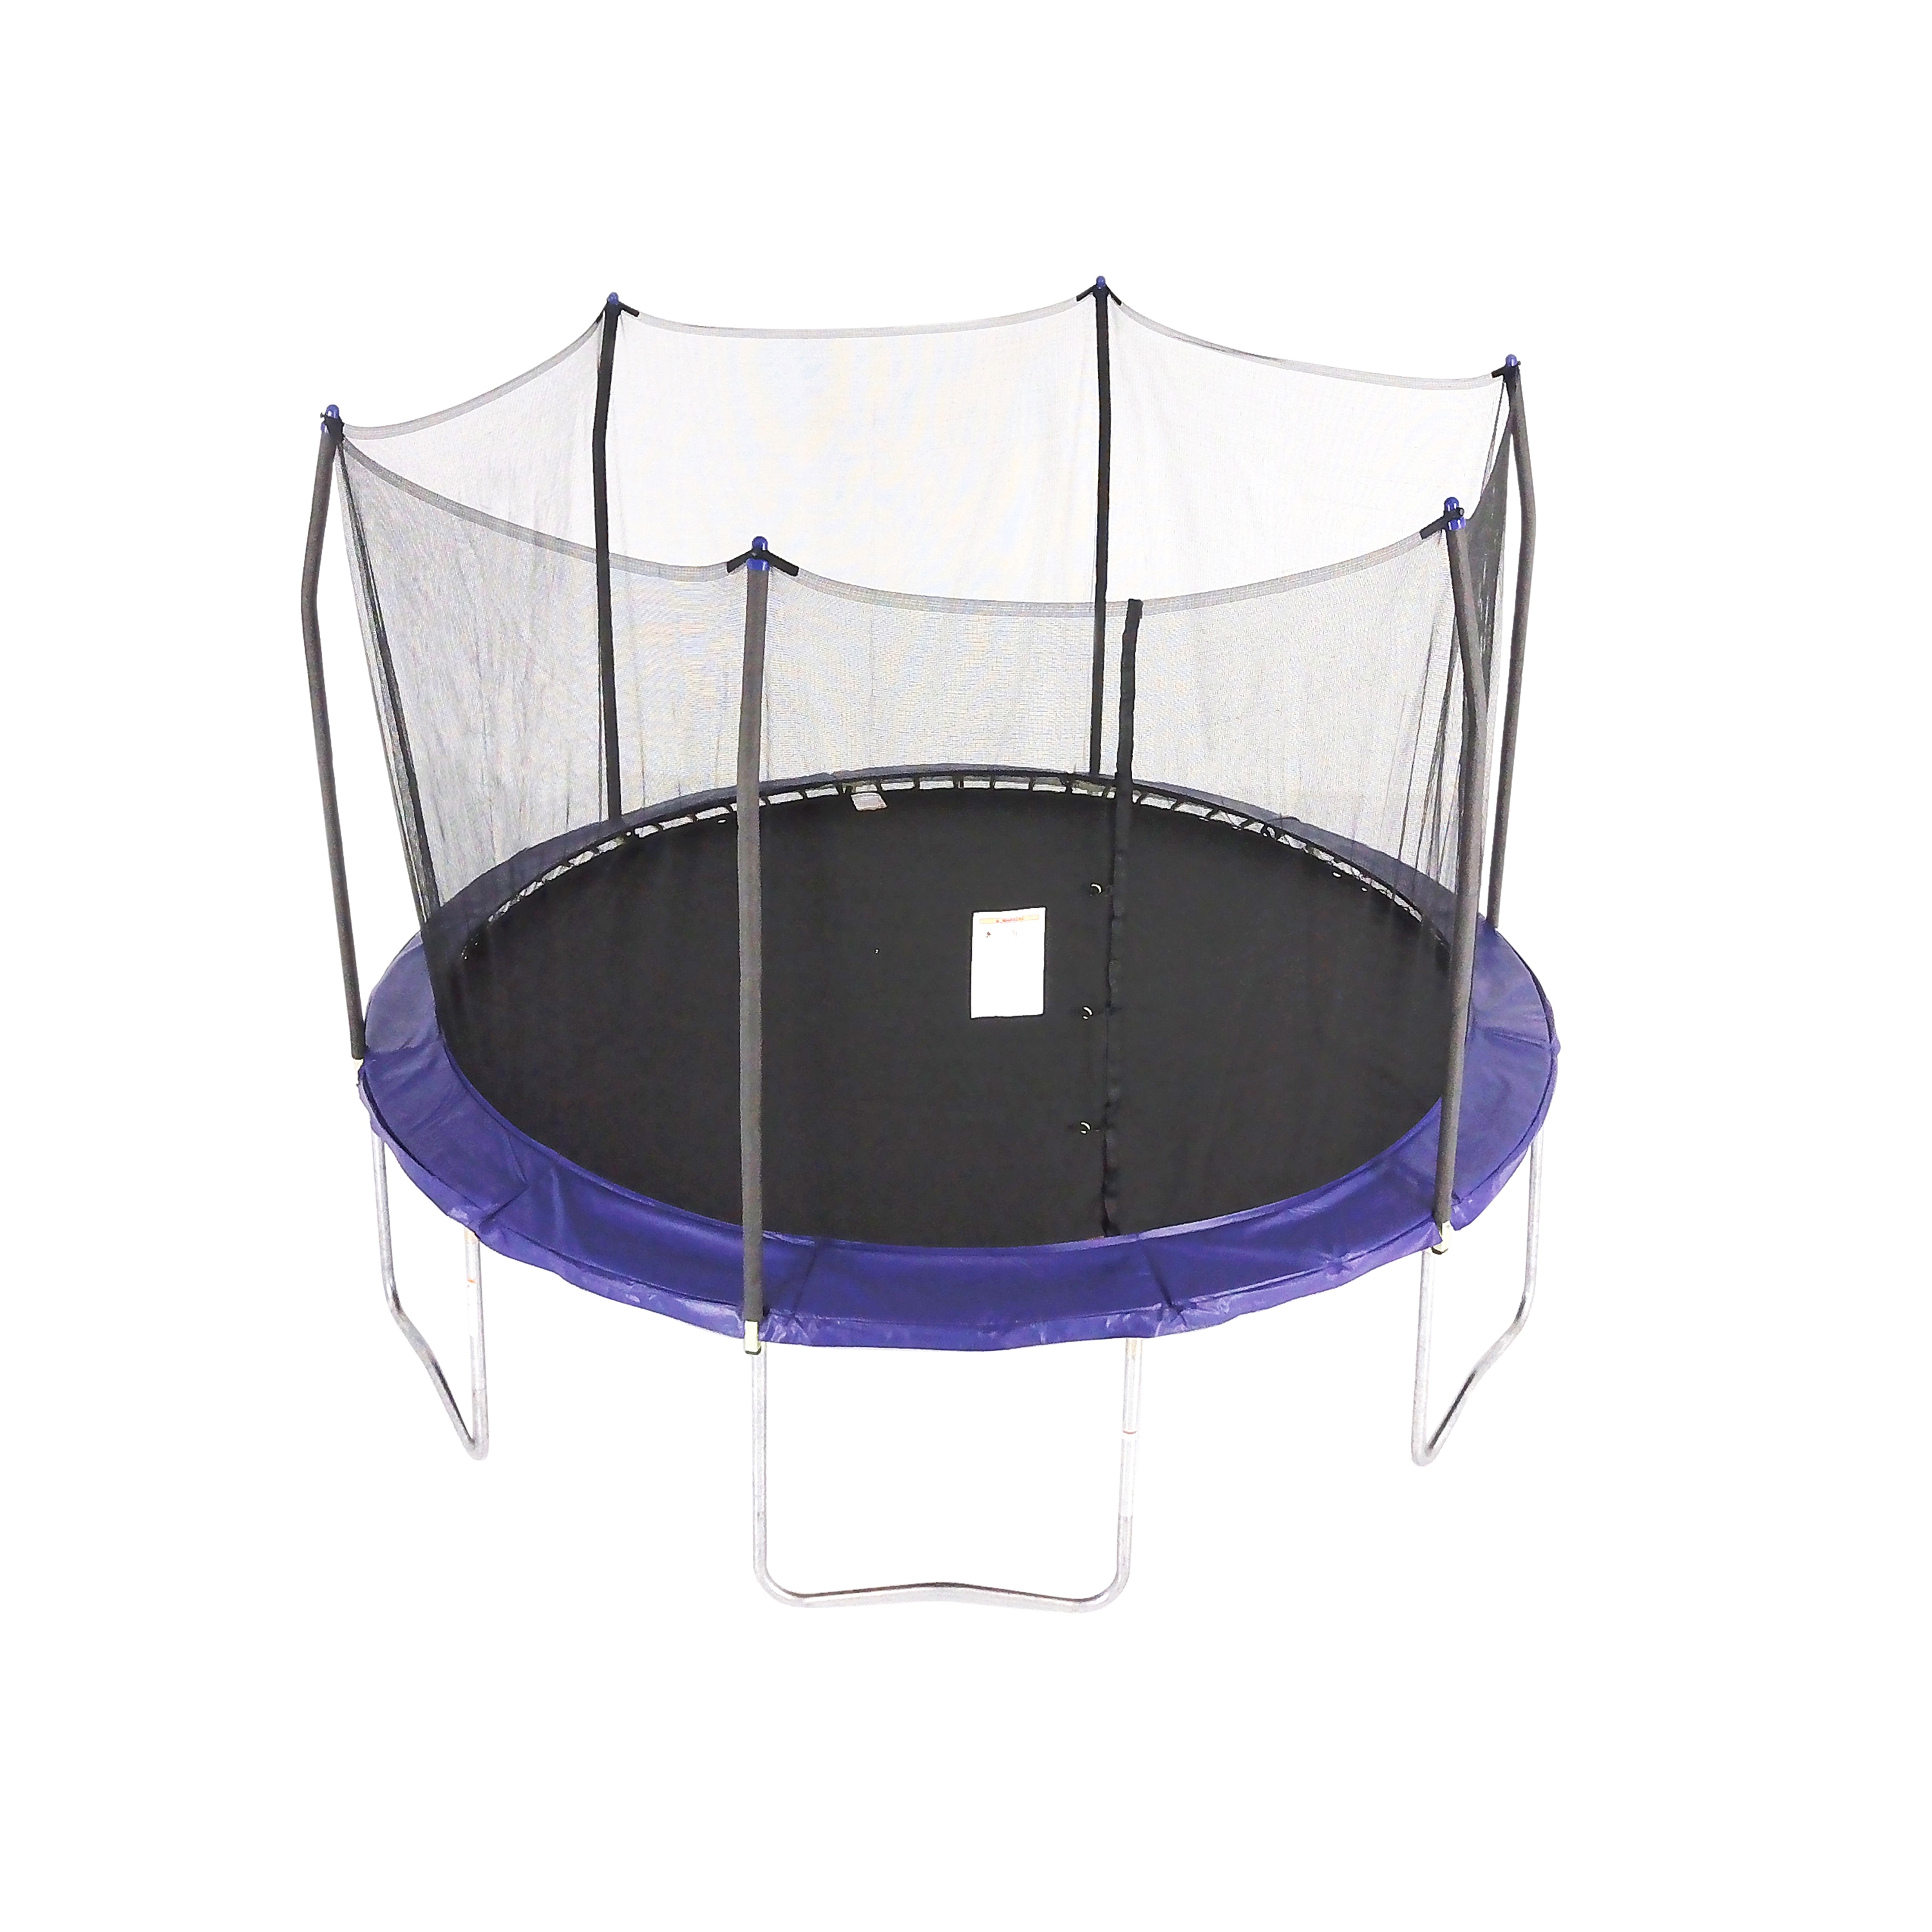 Upper Bounce 9' X 15' Gymnastics Style, Rectangular Trampoline Set with  Premium Top-Ring Enclosure System - Blue/Yellow, Recreational Trampolines 